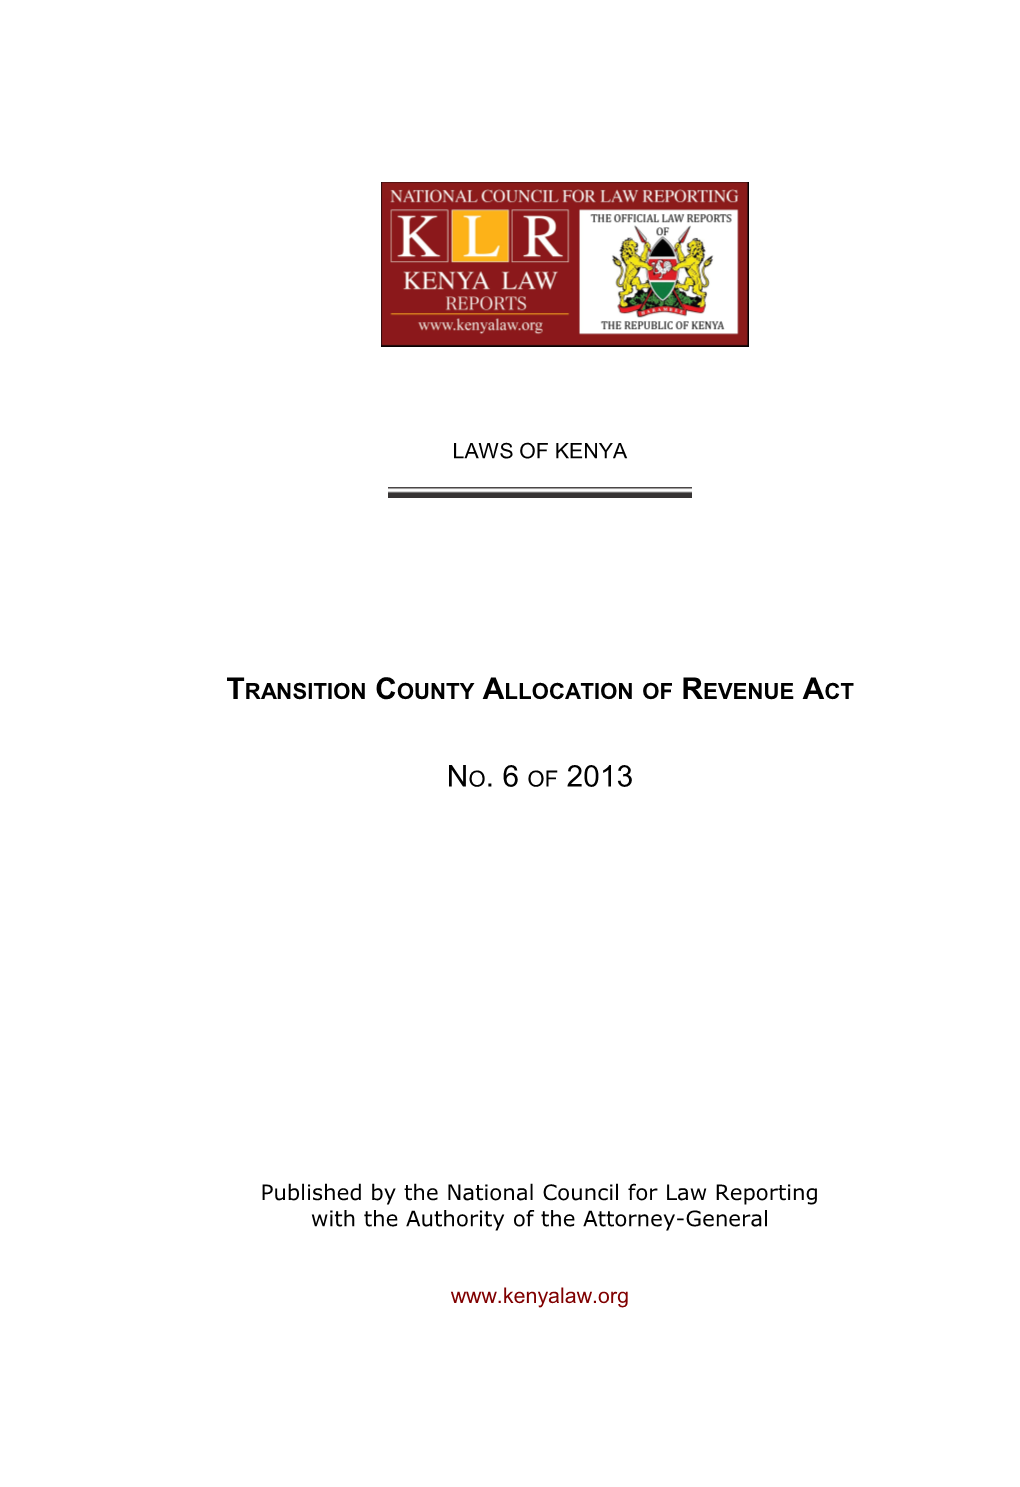 Transition County Allocation of Revenue Act